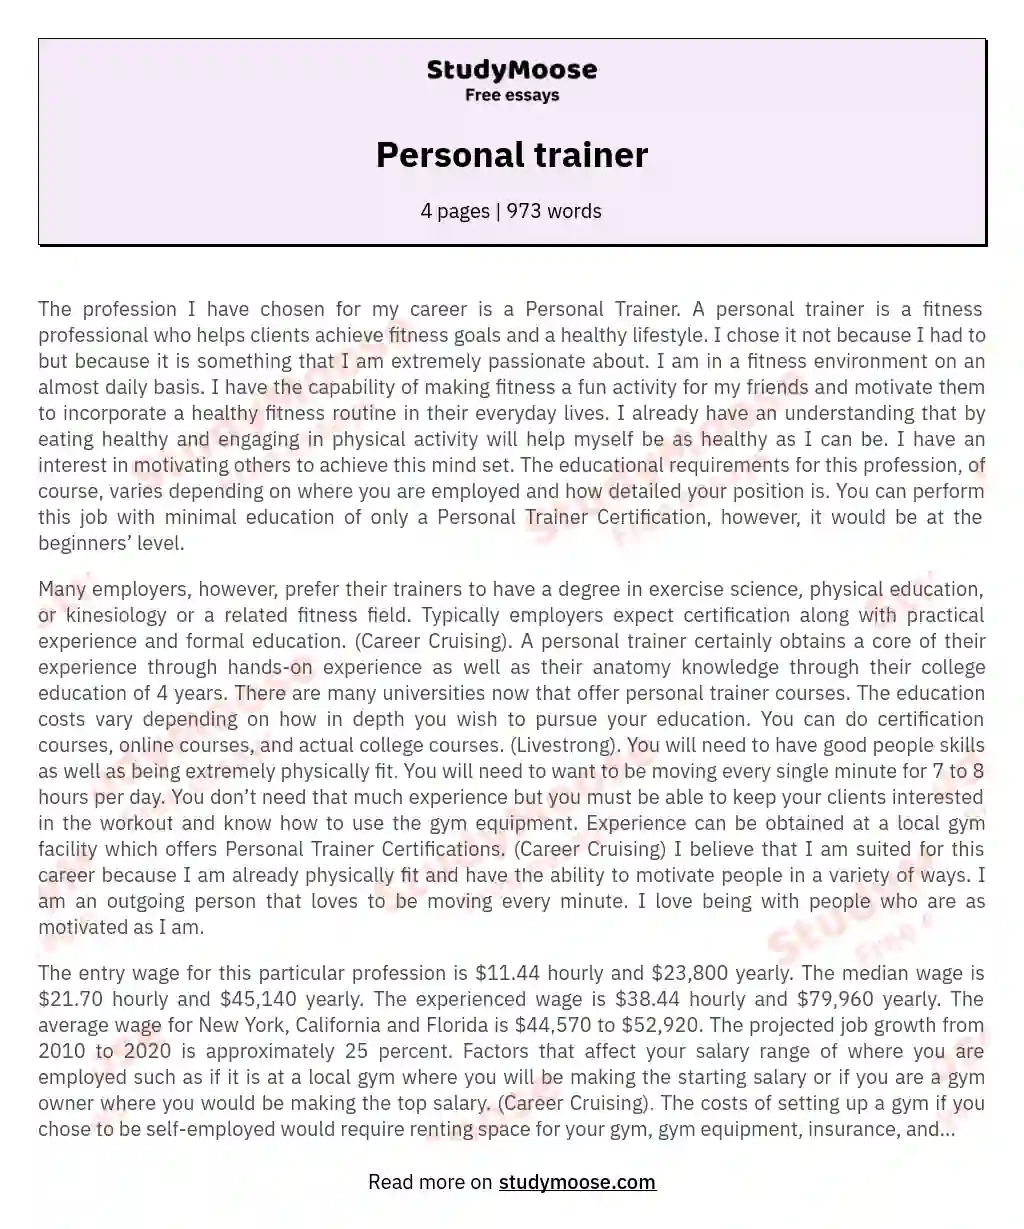 Personal trainer essay